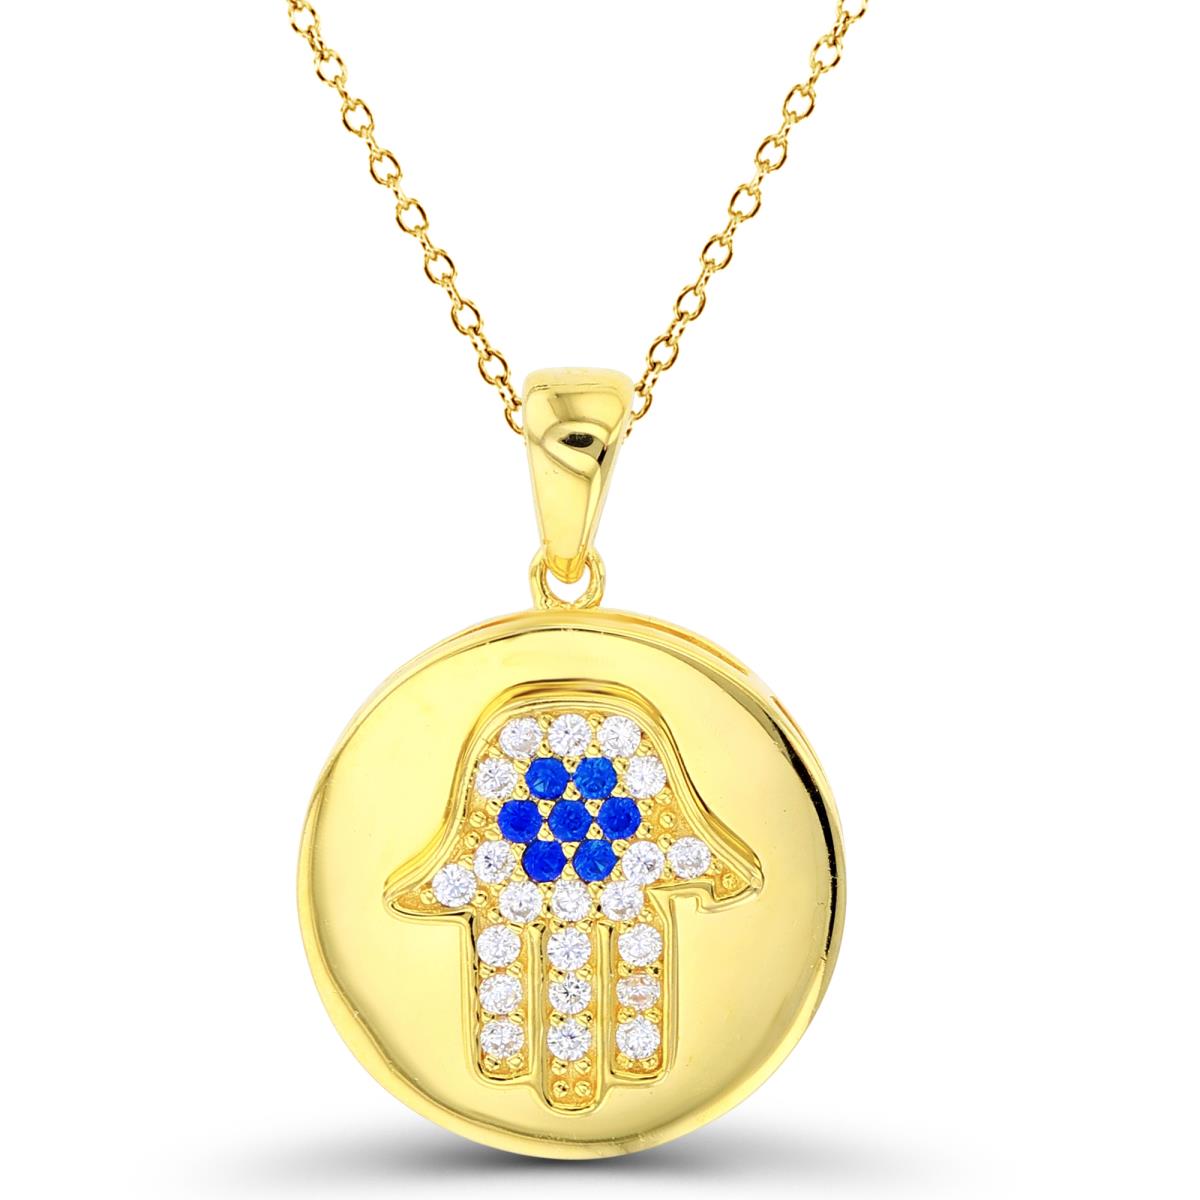 Sterling Silver+1Micron Yellow Gold Pave Rnd #113 Blue Spinel & White CZ Hamsa on High Polish Circle 18"Necklace